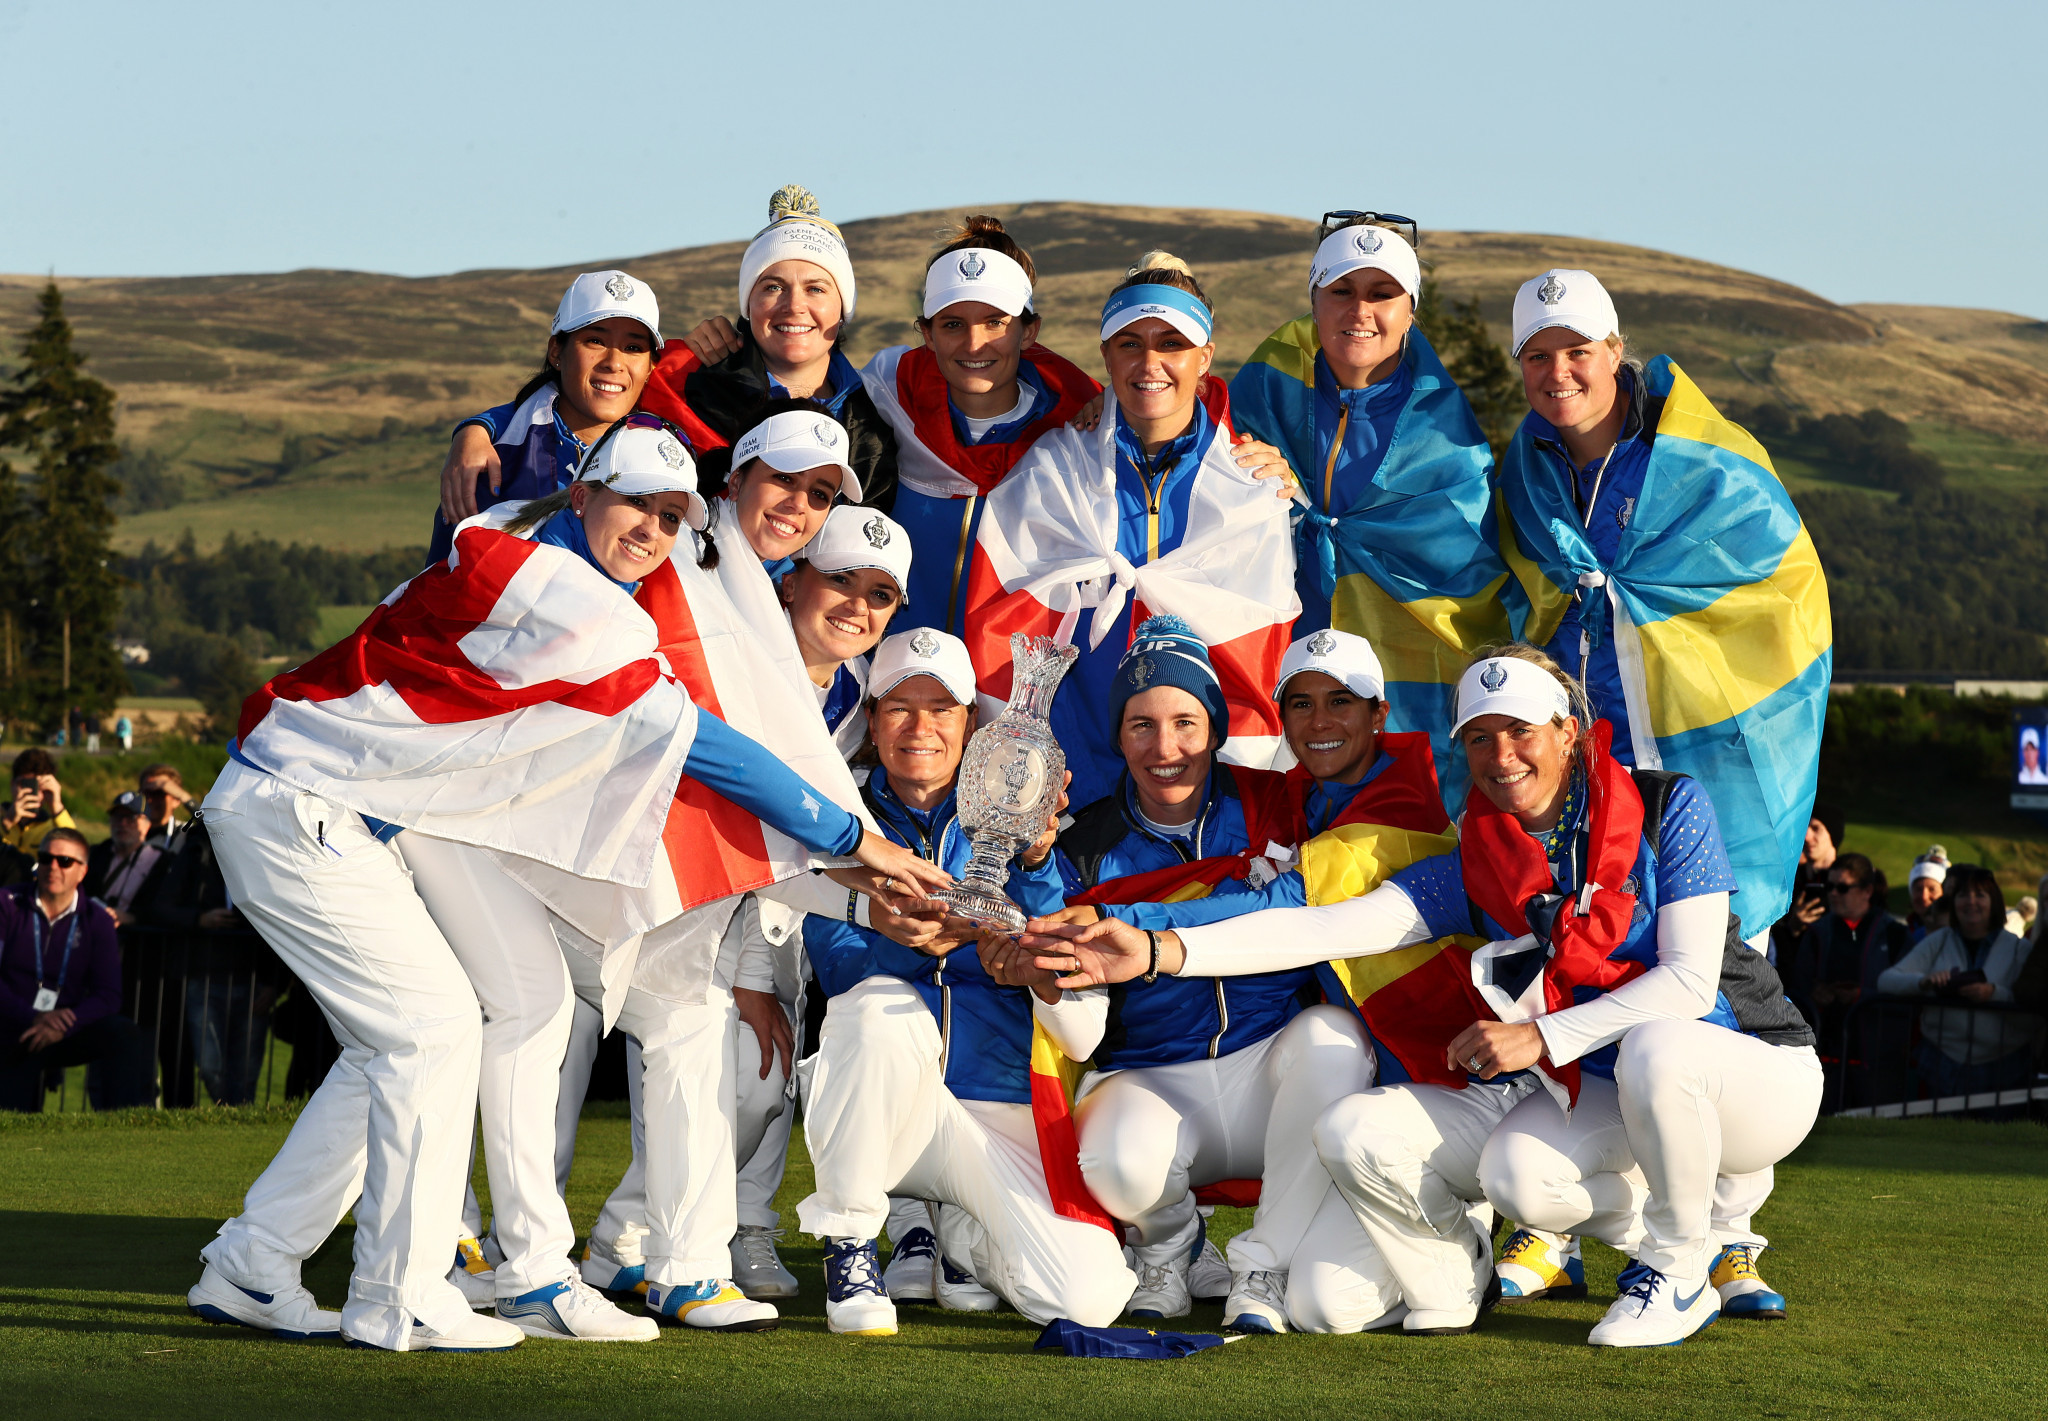 Europe will defend its title at the 2021 Solheim Cup ©Getty Images